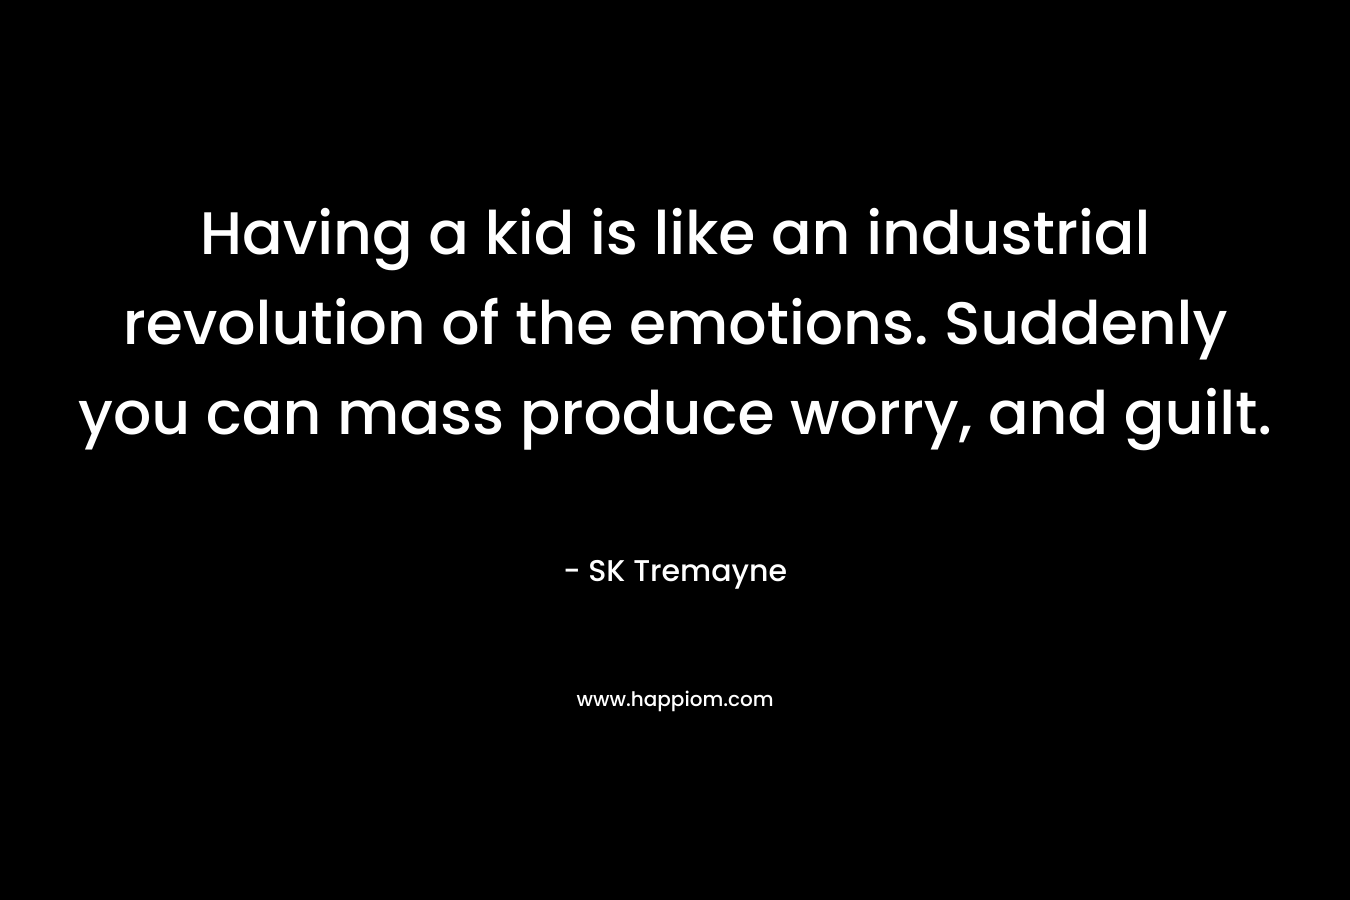 Having a kid is like an industrial revolution of the emotions. Suddenly you can mass produce worry, and guilt. – SK Tremayne